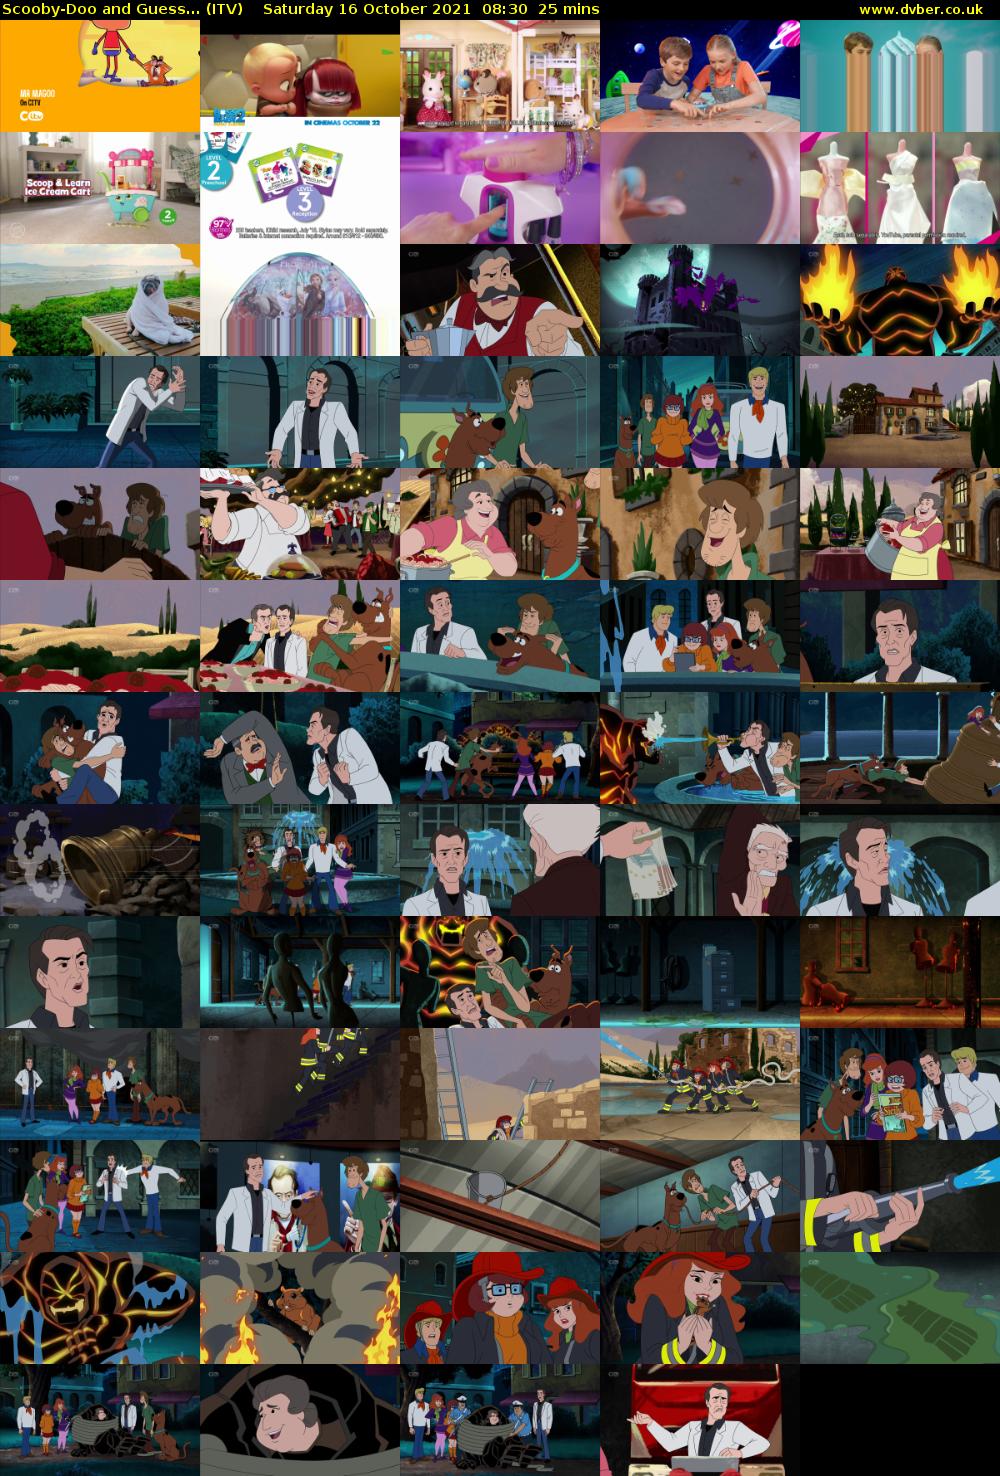 Scooby-Doo and Guess... (ITV) Saturday 16 October 2021 08:30 - 08:55